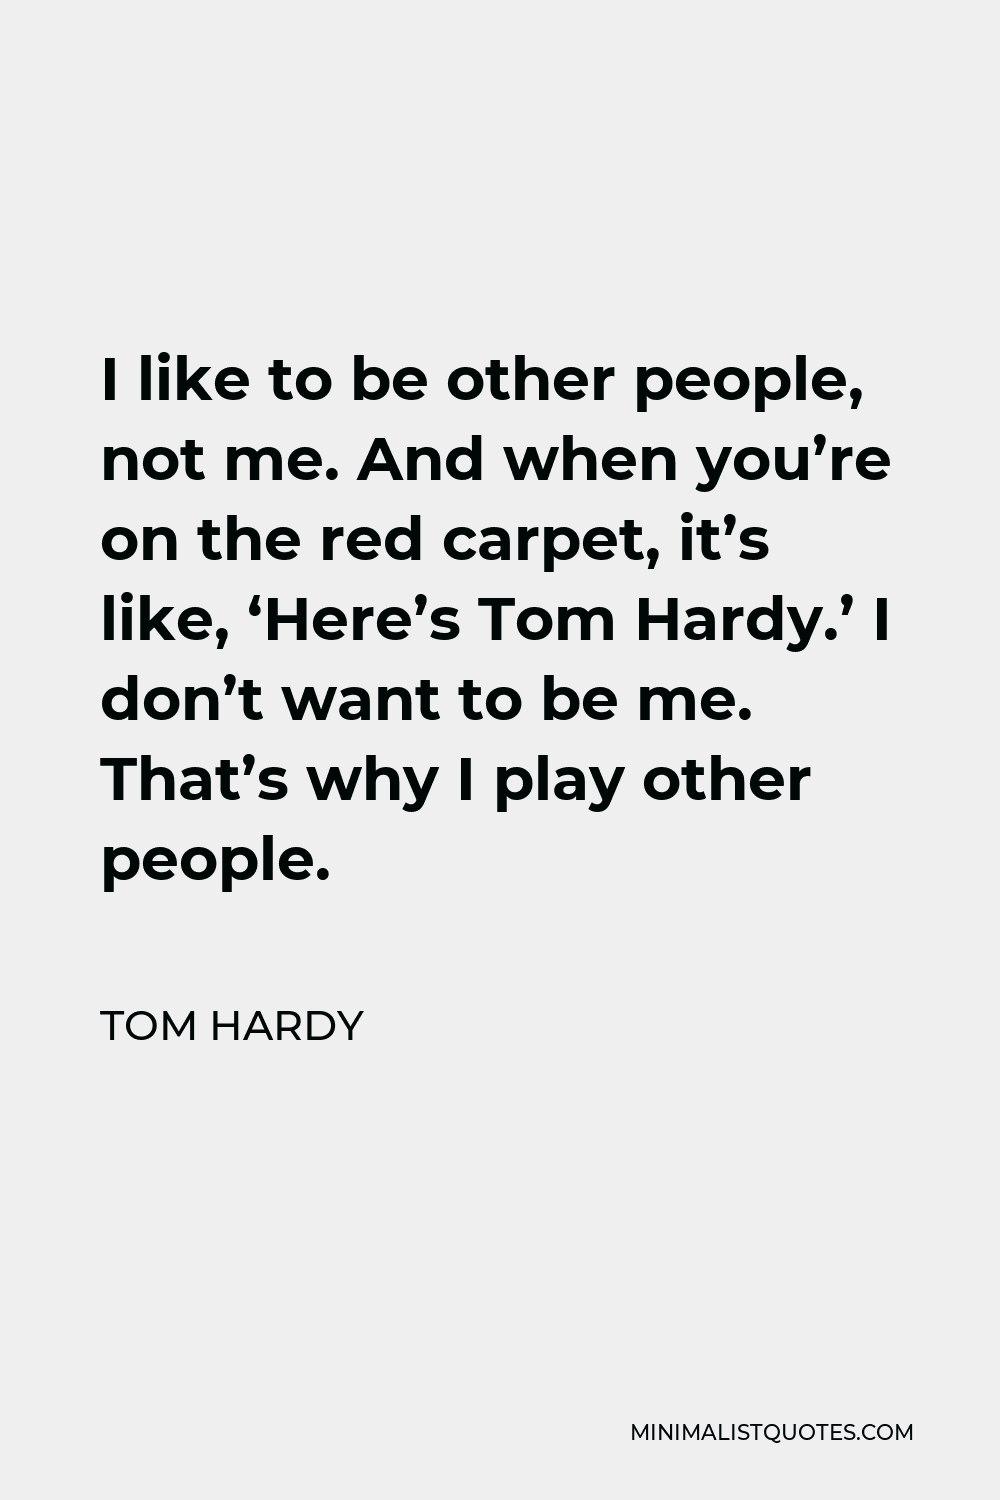 Tom Hardy Quote - I like to be other people, not me. And when you’re on the red carpet, it’s like, ‘Here’s Tom Hardy.’ I don’t want to be me. That’s why I play other people.